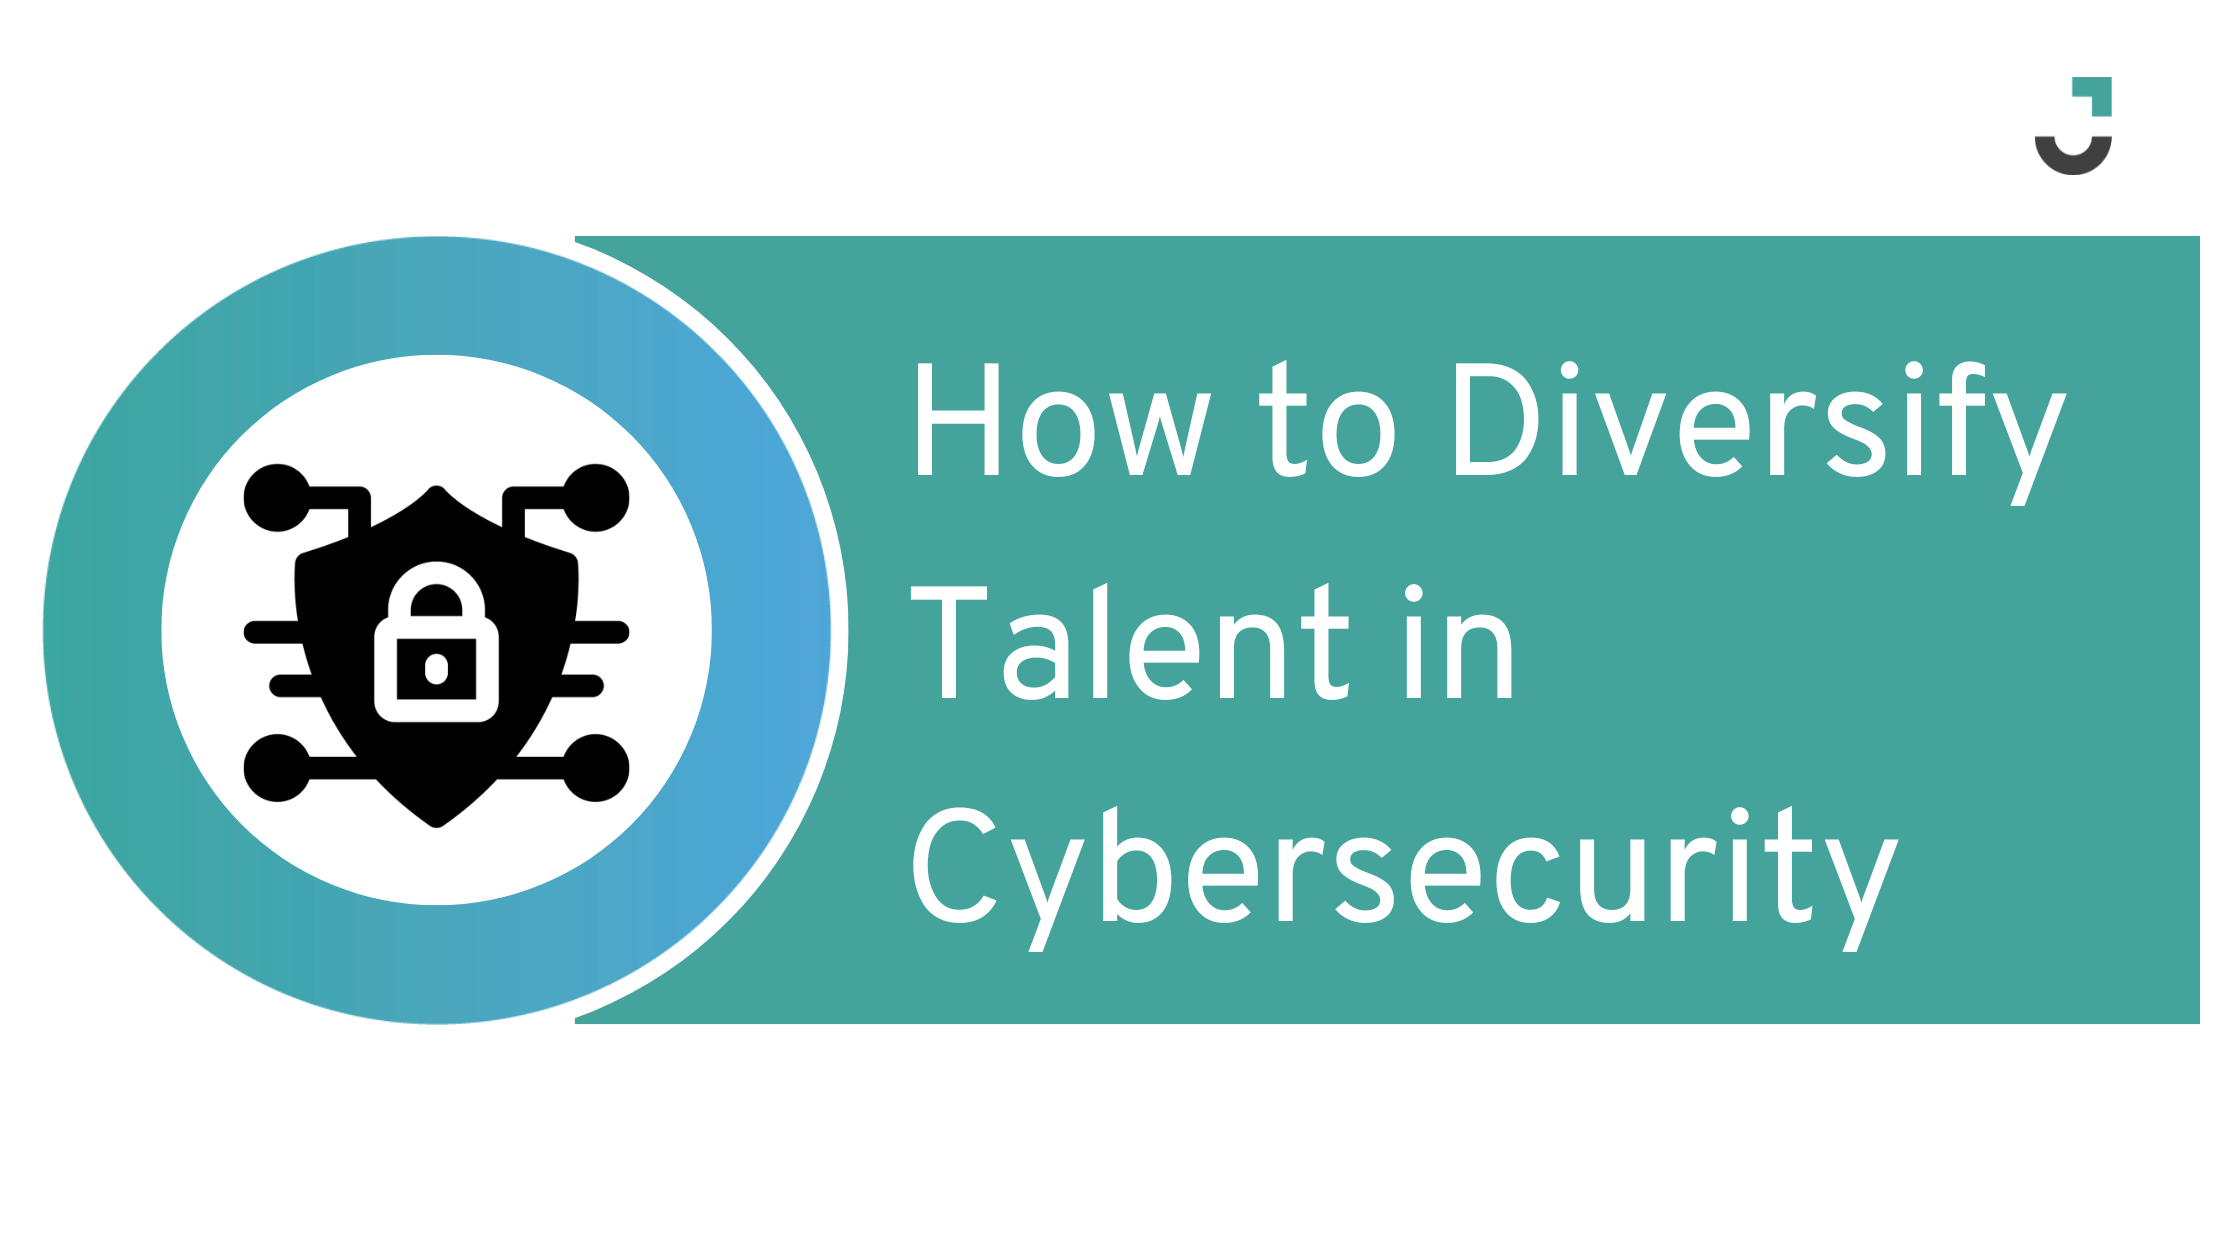 How to Diversify Talent in Cybersecurity